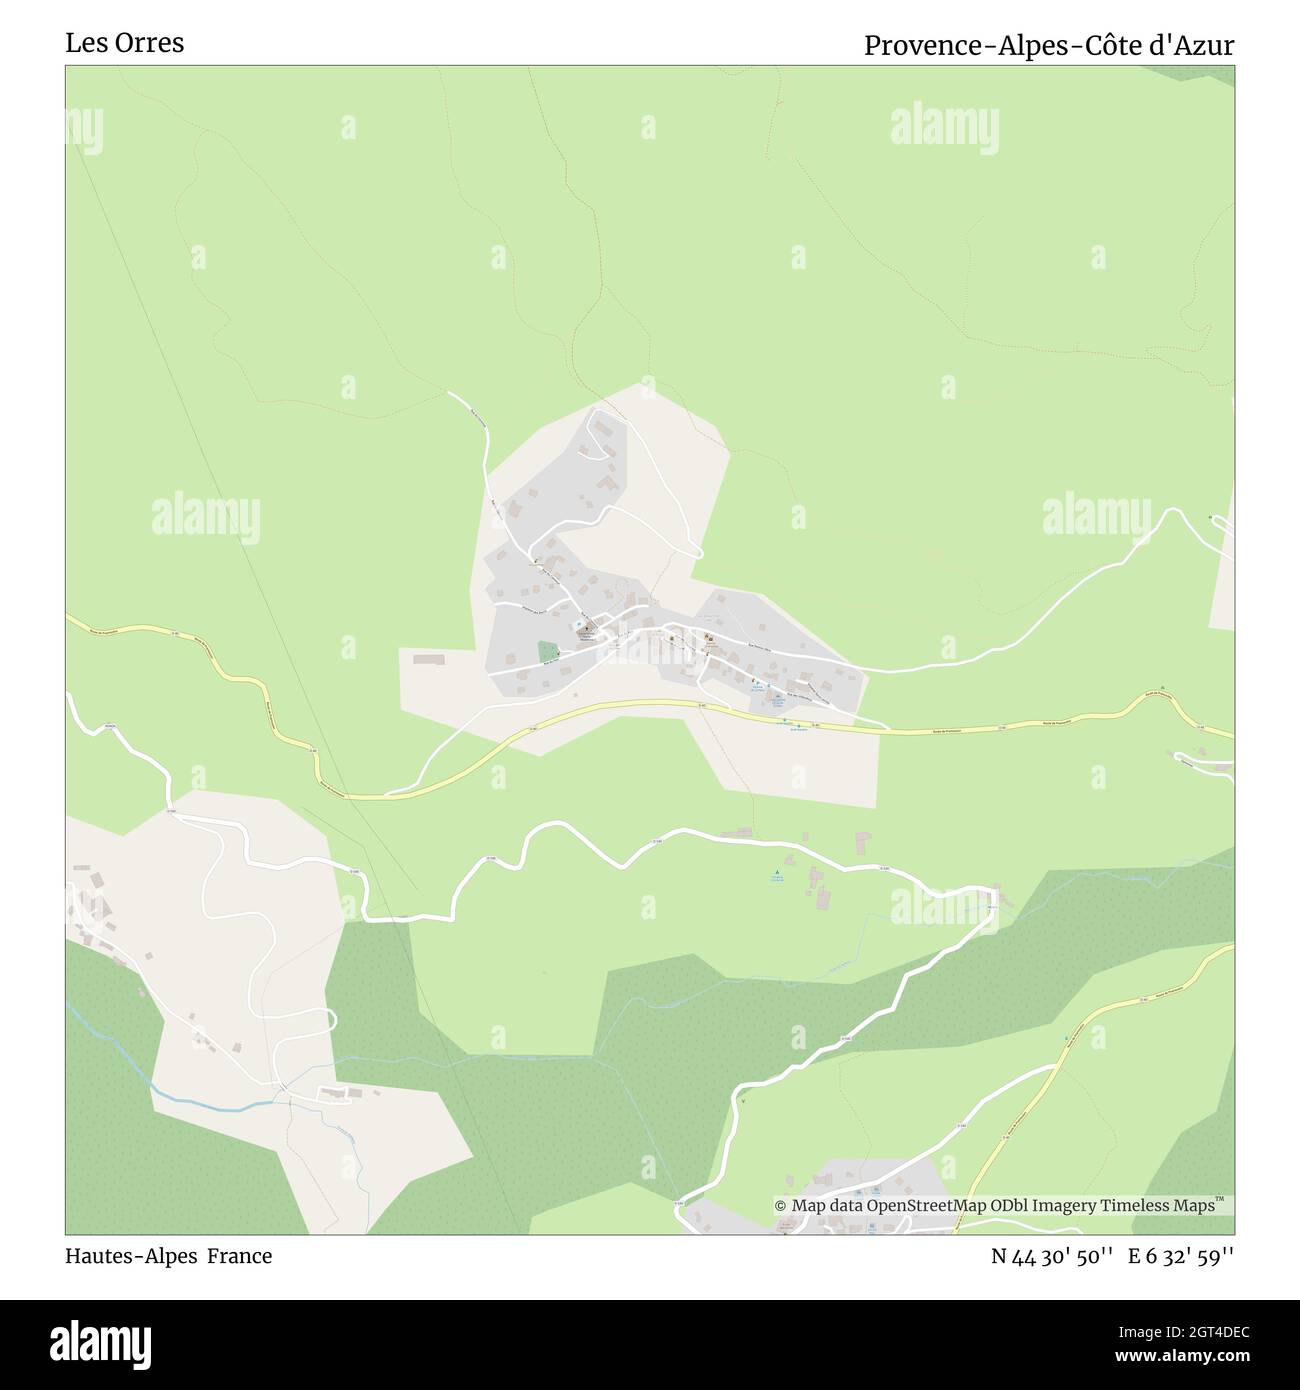 Les Orres, Hautes-Alpes, France, Provence-Alpes-Côte d'Azur, N 44 30' 50'', E 6 32' 59'', map, Timeless Map published in 2021. Travelers, explorers and adventurers like Florence Nightingale, David Livingstone, Ernest Shackleton, Lewis and Clark and Sherlock Holmes relied on maps to plan travels to the world's most remote corners, Timeless Maps is mapping most locations on the globe, showing the achievement of great dreams Stock Photo